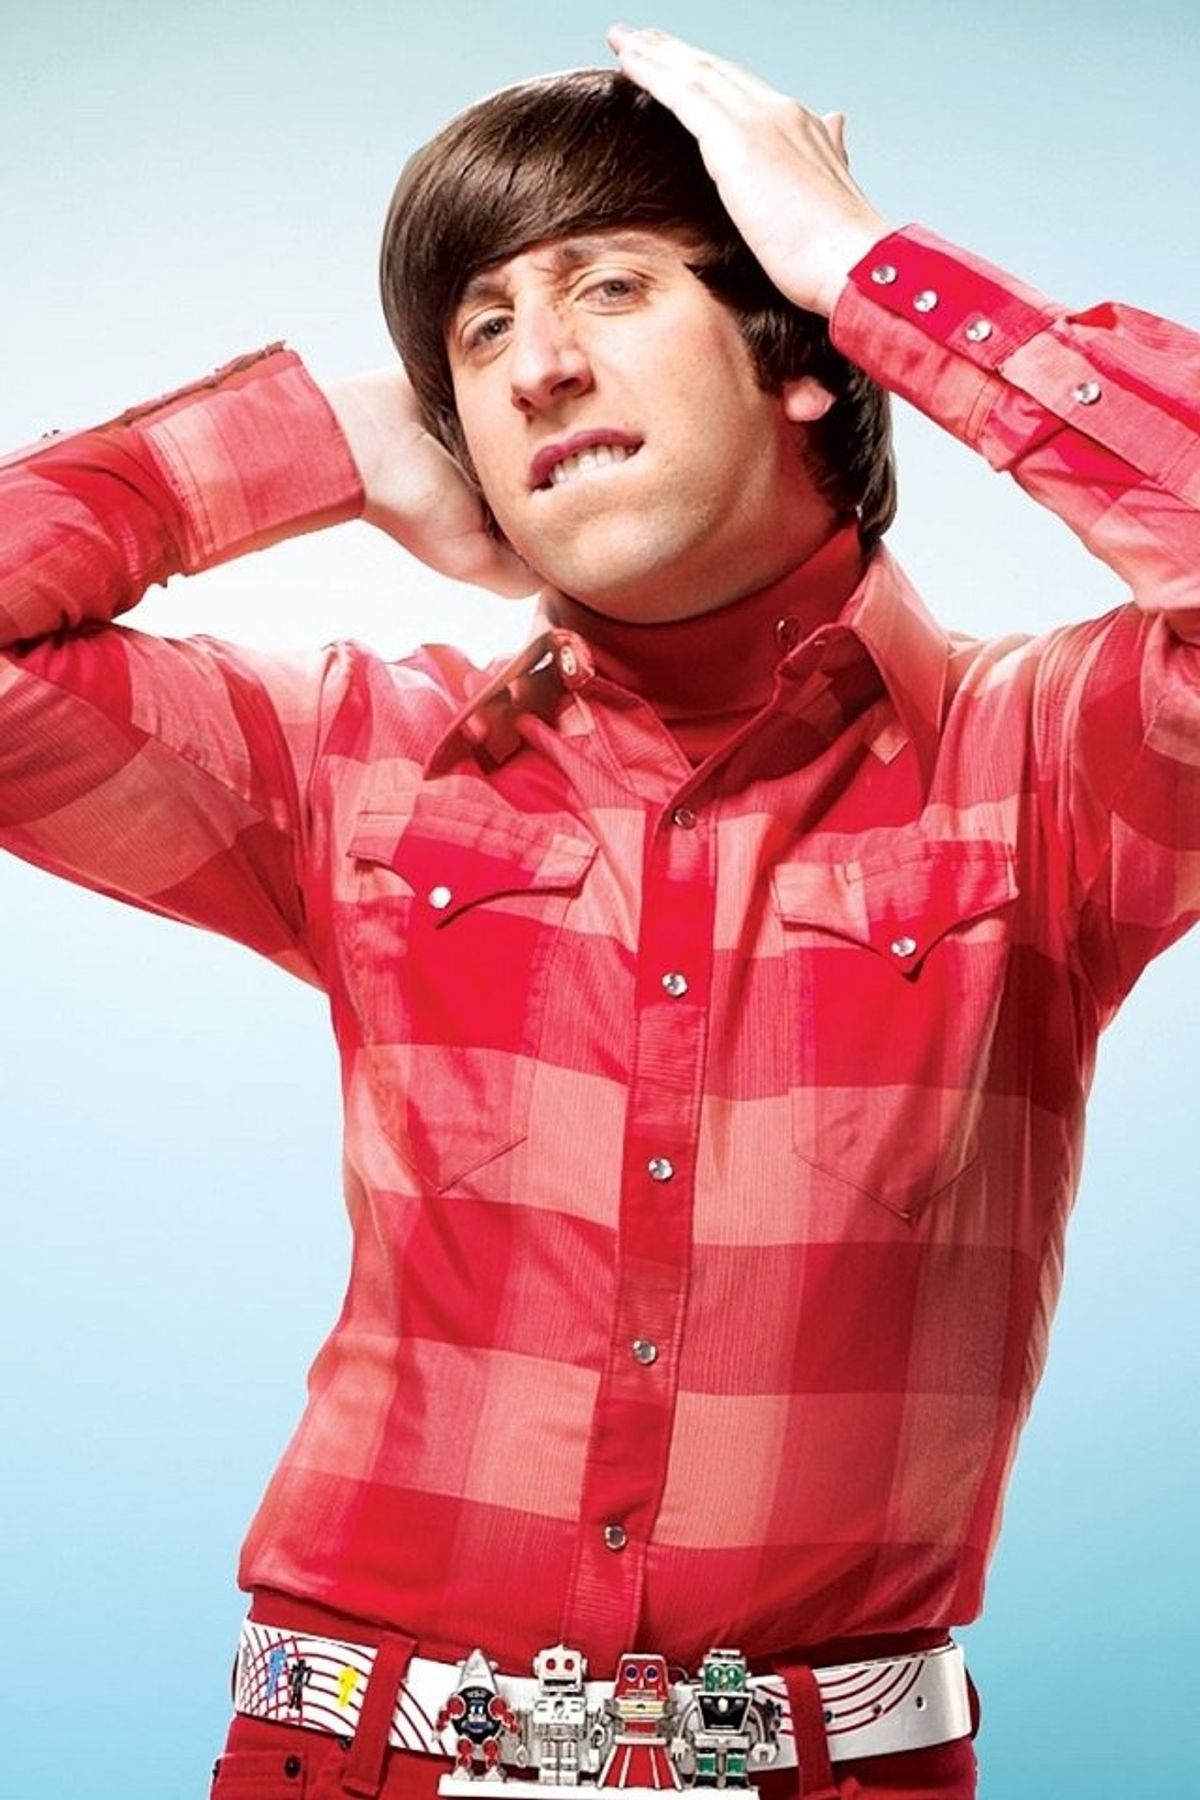 16 Signs You're The Howard Wolowitz Of Your Social Circle